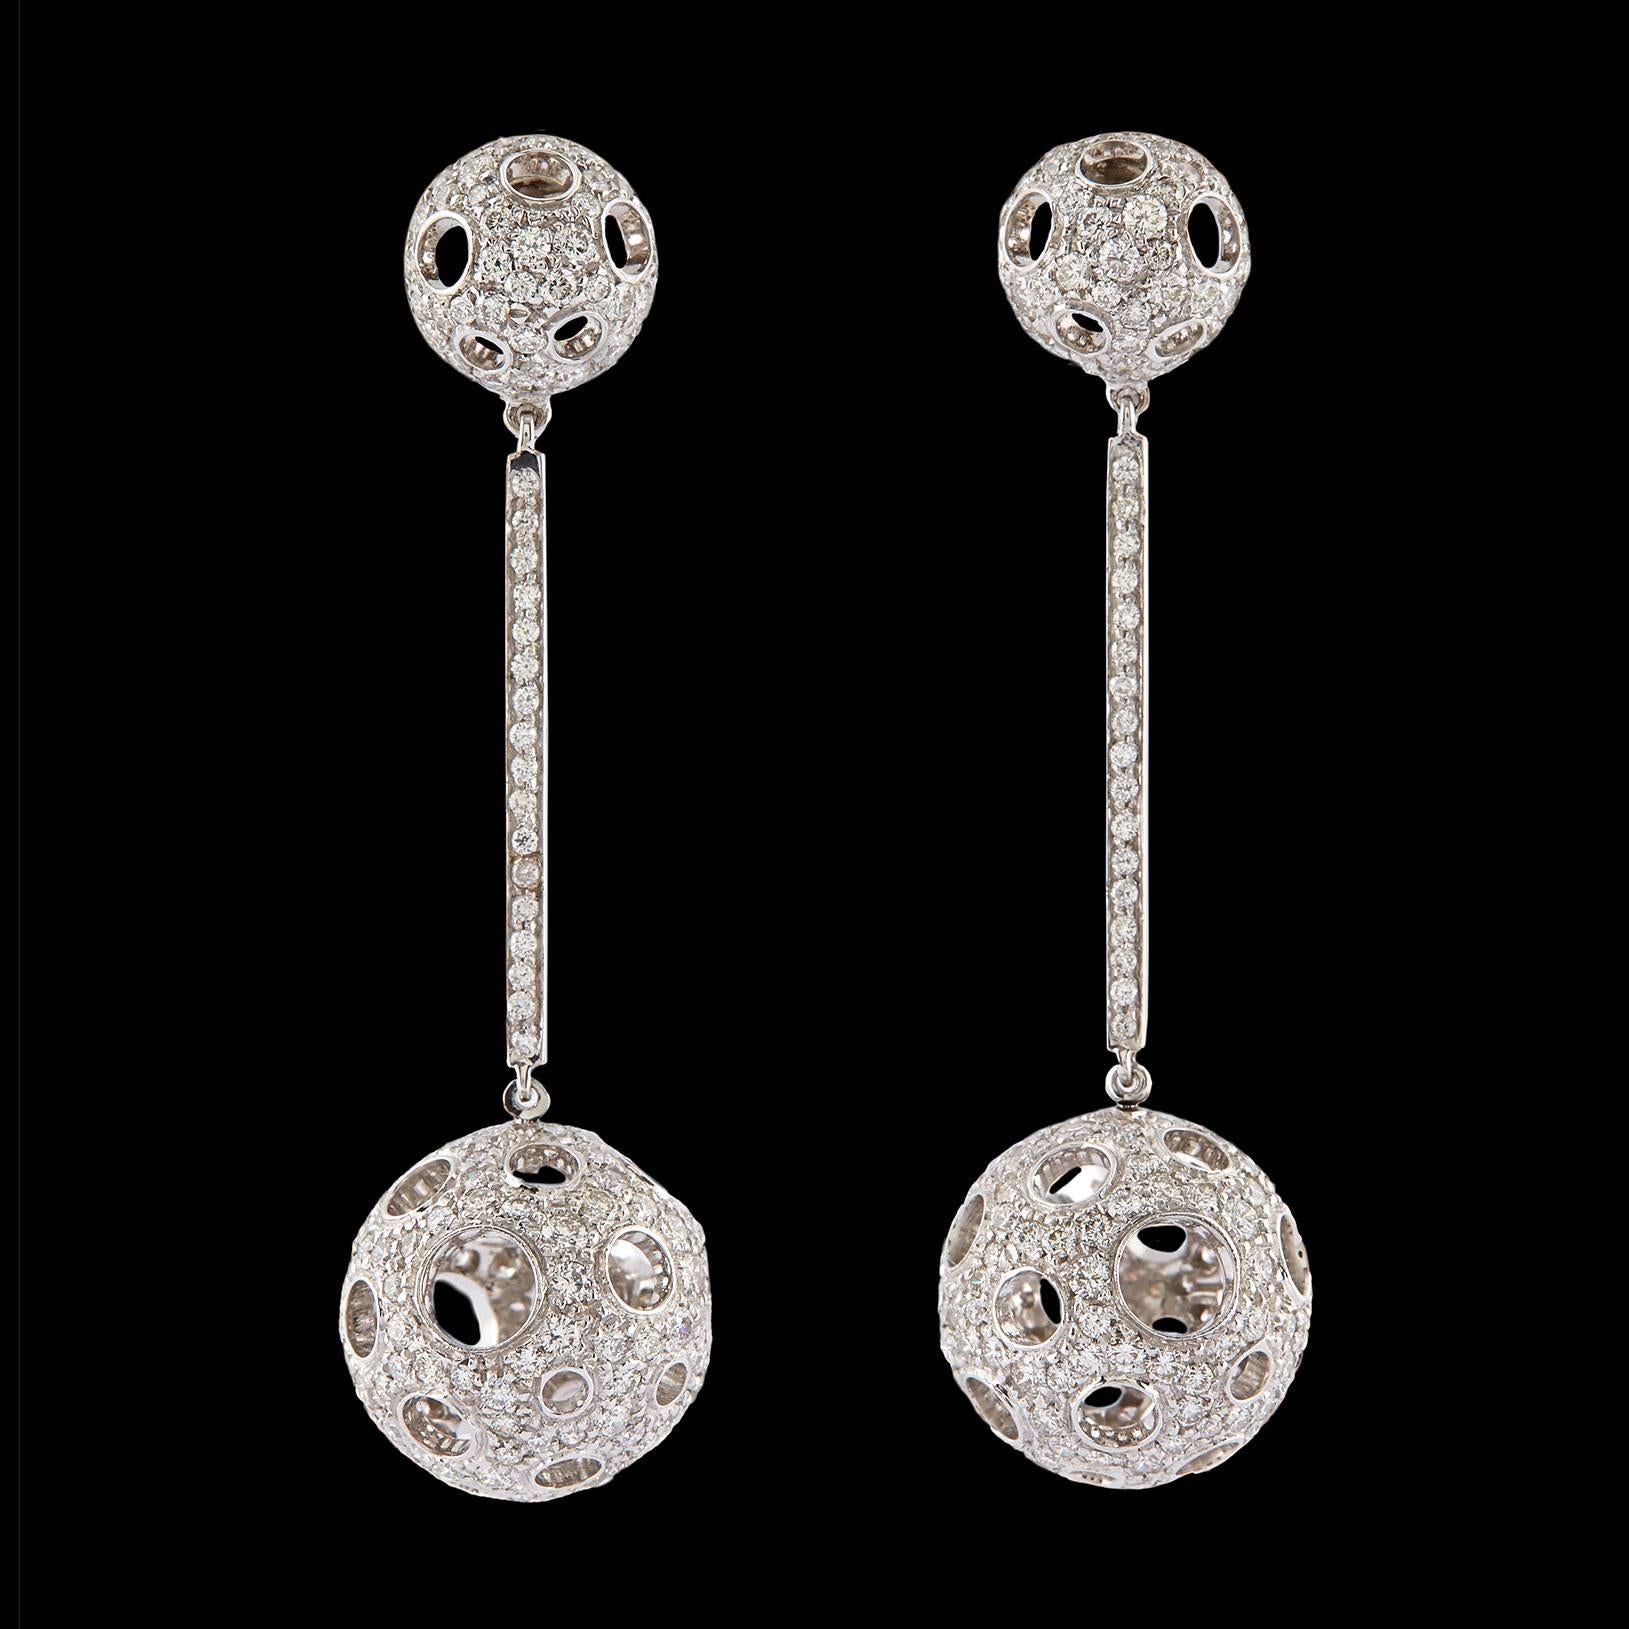 Luca Carati Dazzling Dangle Pave Diamond Ball Earrings totaling 4.27 carats set in 18Kt White Gold. The total length of each earring is 2 2/16″, the small ball at the earring post end is 7/16″ wide, separated by a 1″ bar between the larger ball